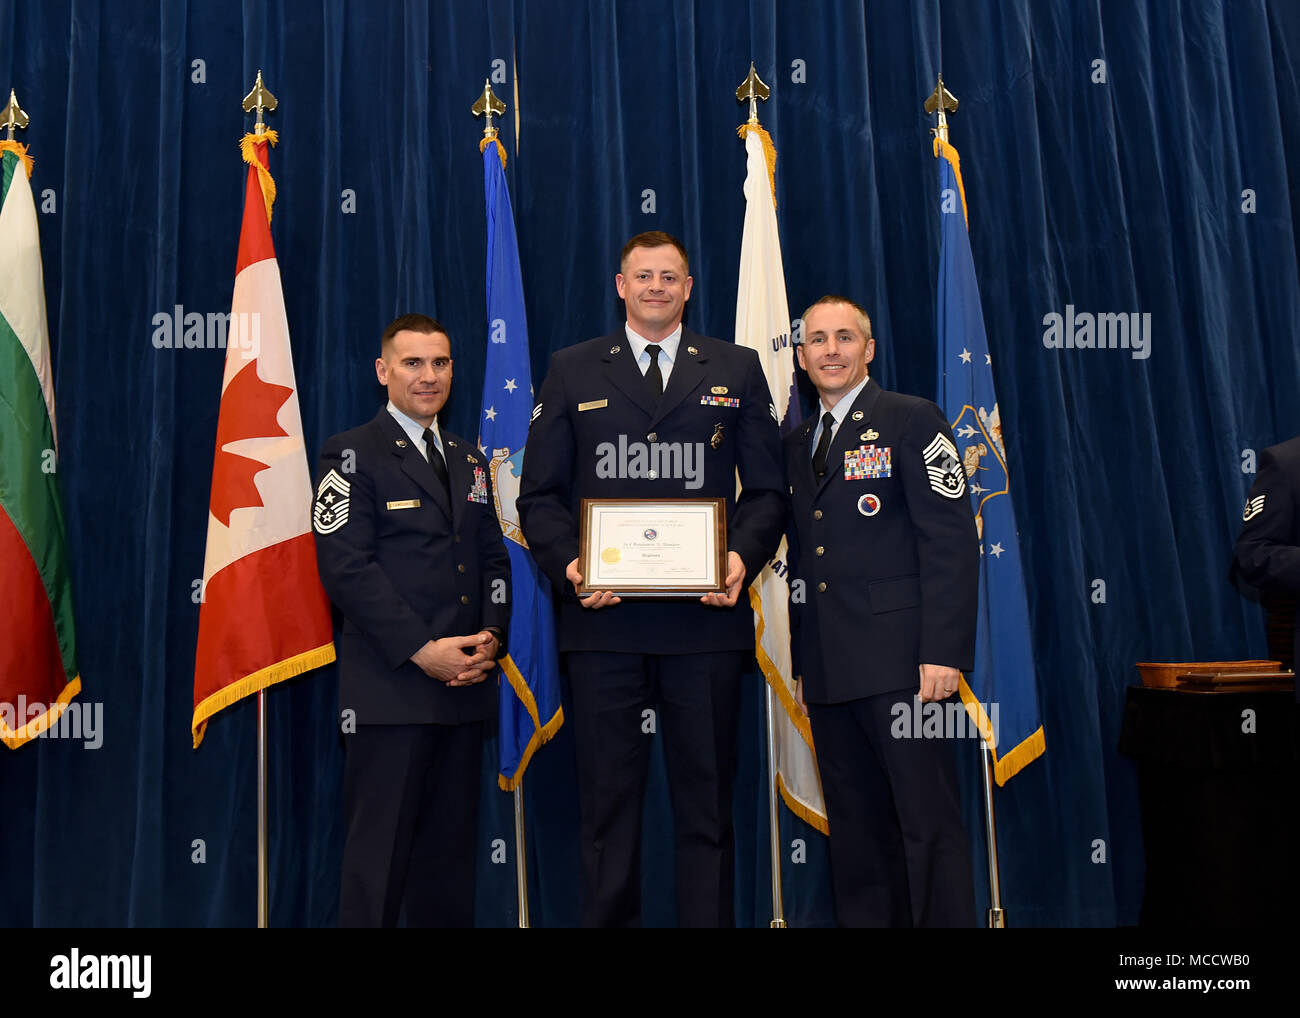 Senior Airman Ben Slenker from Rosecrans Air National Guard Base, Mo., takes the Distinguished Graduate Award in Airman Leadership School BLC 18-3 at the Chief Master Sgt. Paul H. Lankford Enlisted Professional Military Education Center on McGhee Tyson Air National Guard Base in East Tennessee, Feb. 8, 2018, during the graduation ceremony. (U.S. Air National Guard photo/Master Sgt. Mike R. Smith) Stock Photo